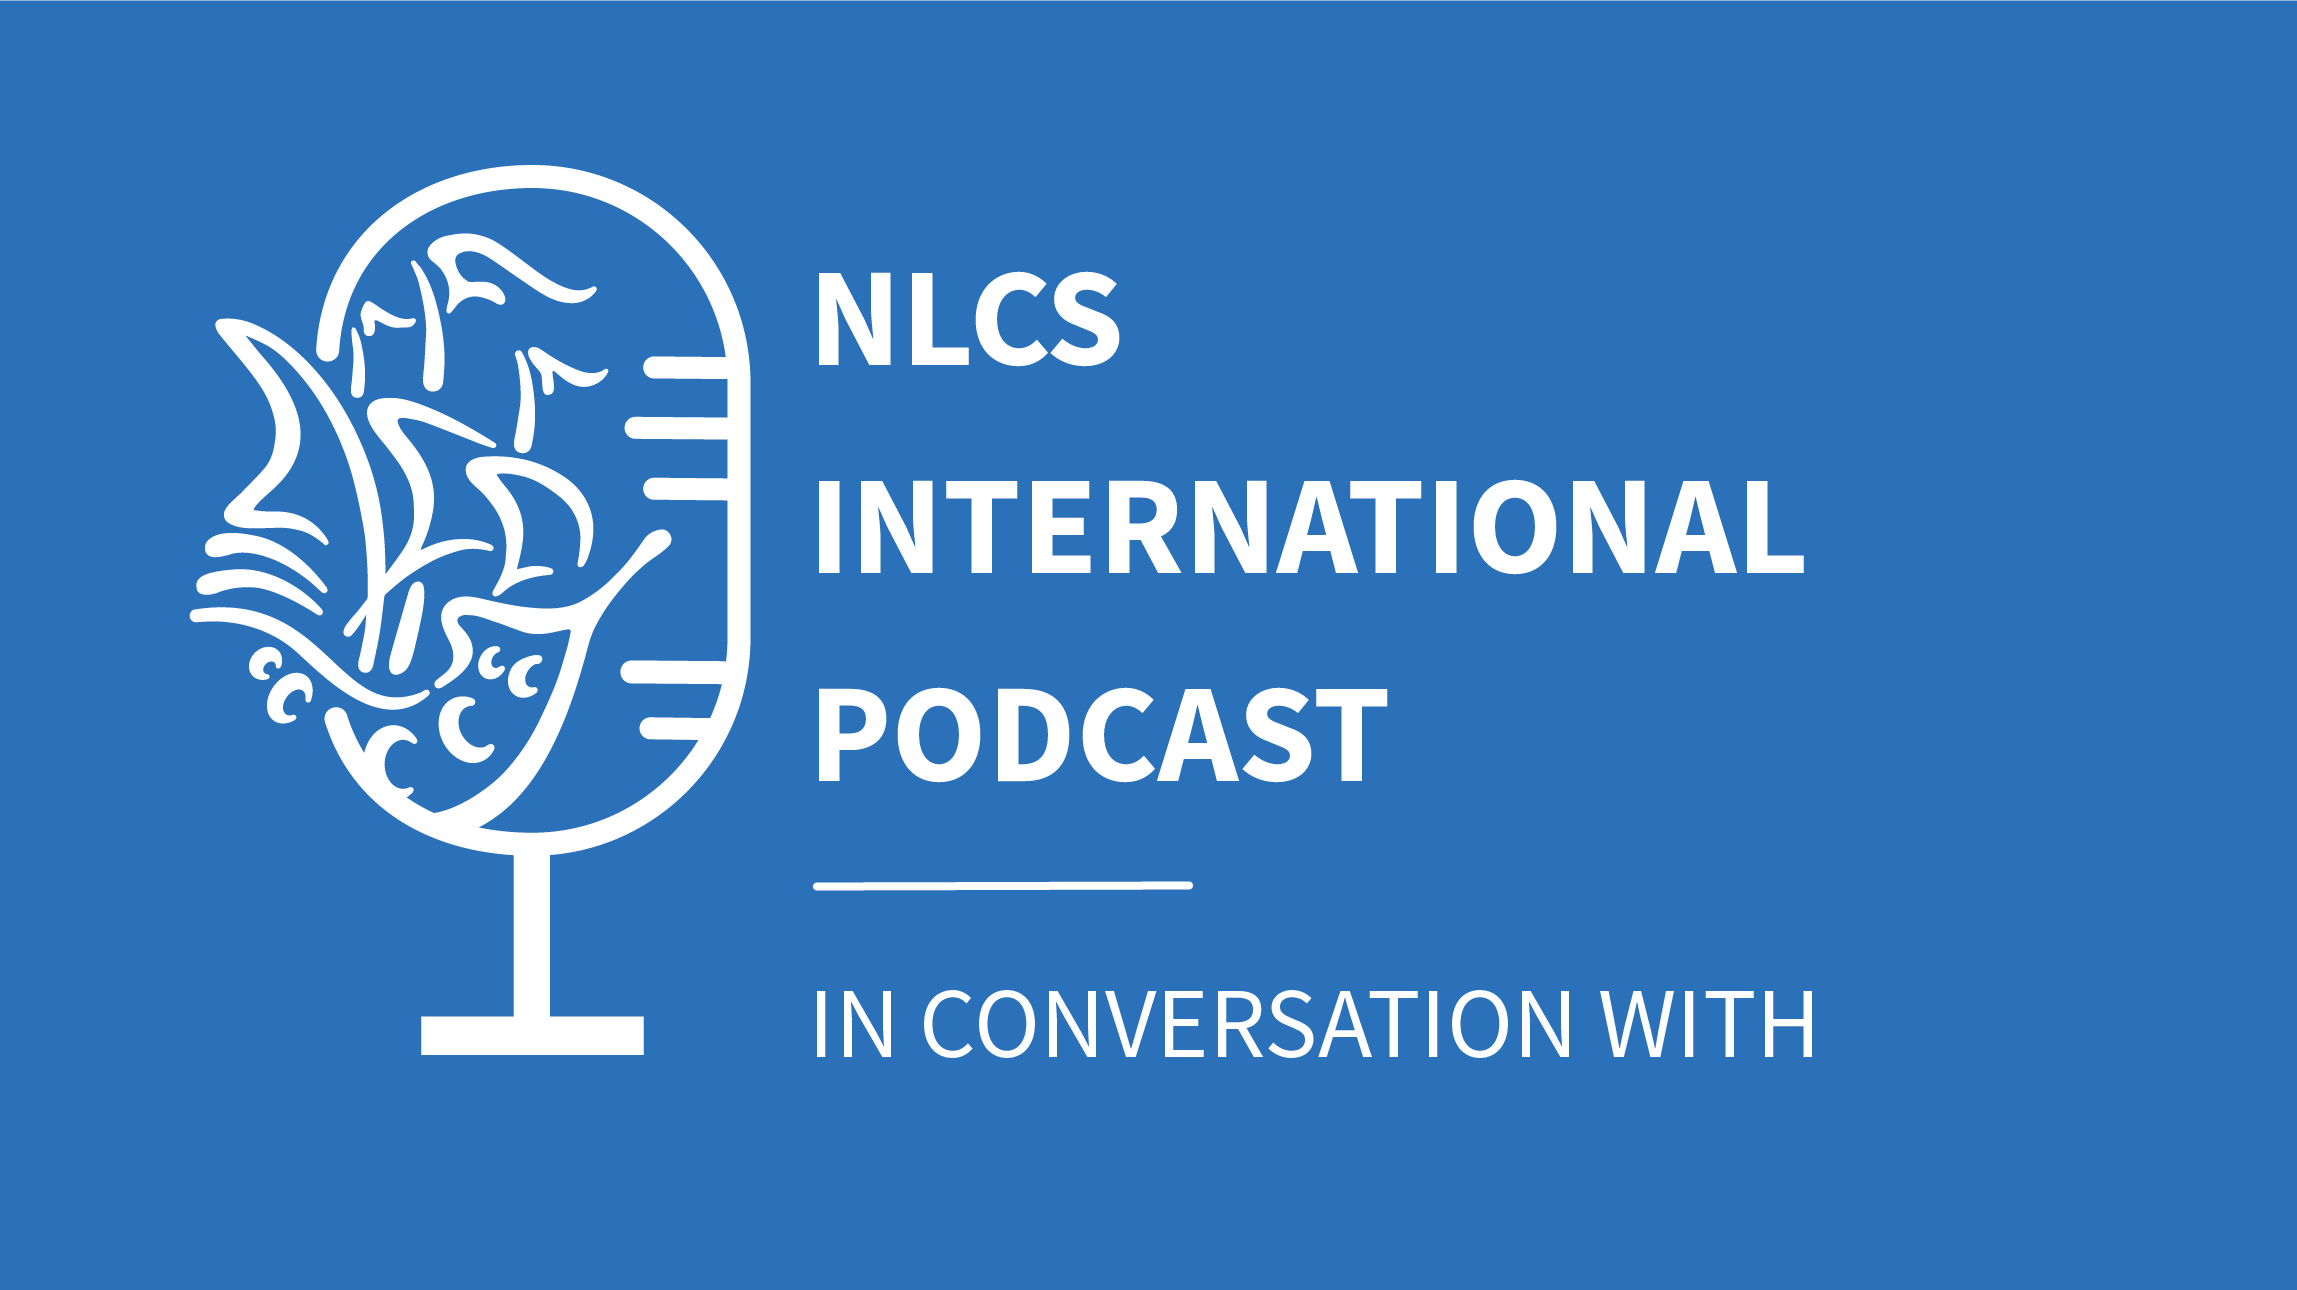 NLCS International Podcast in conversation with